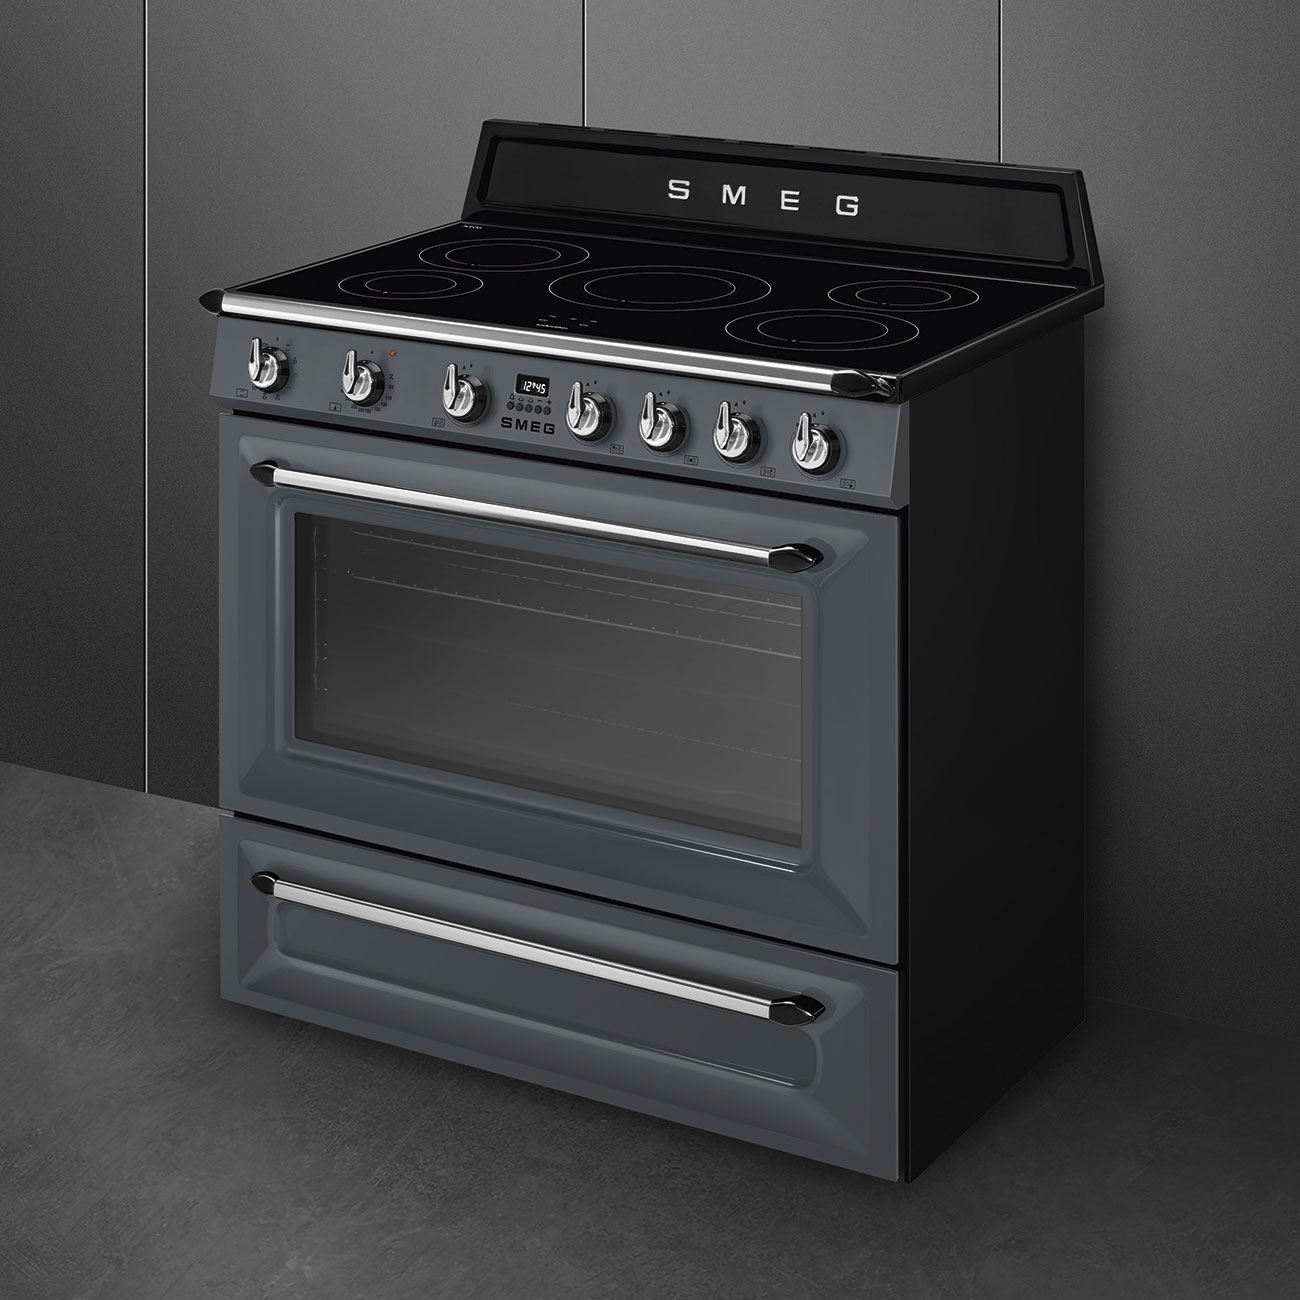 Smeg Slate Grey Cooker with Induction Hob_4